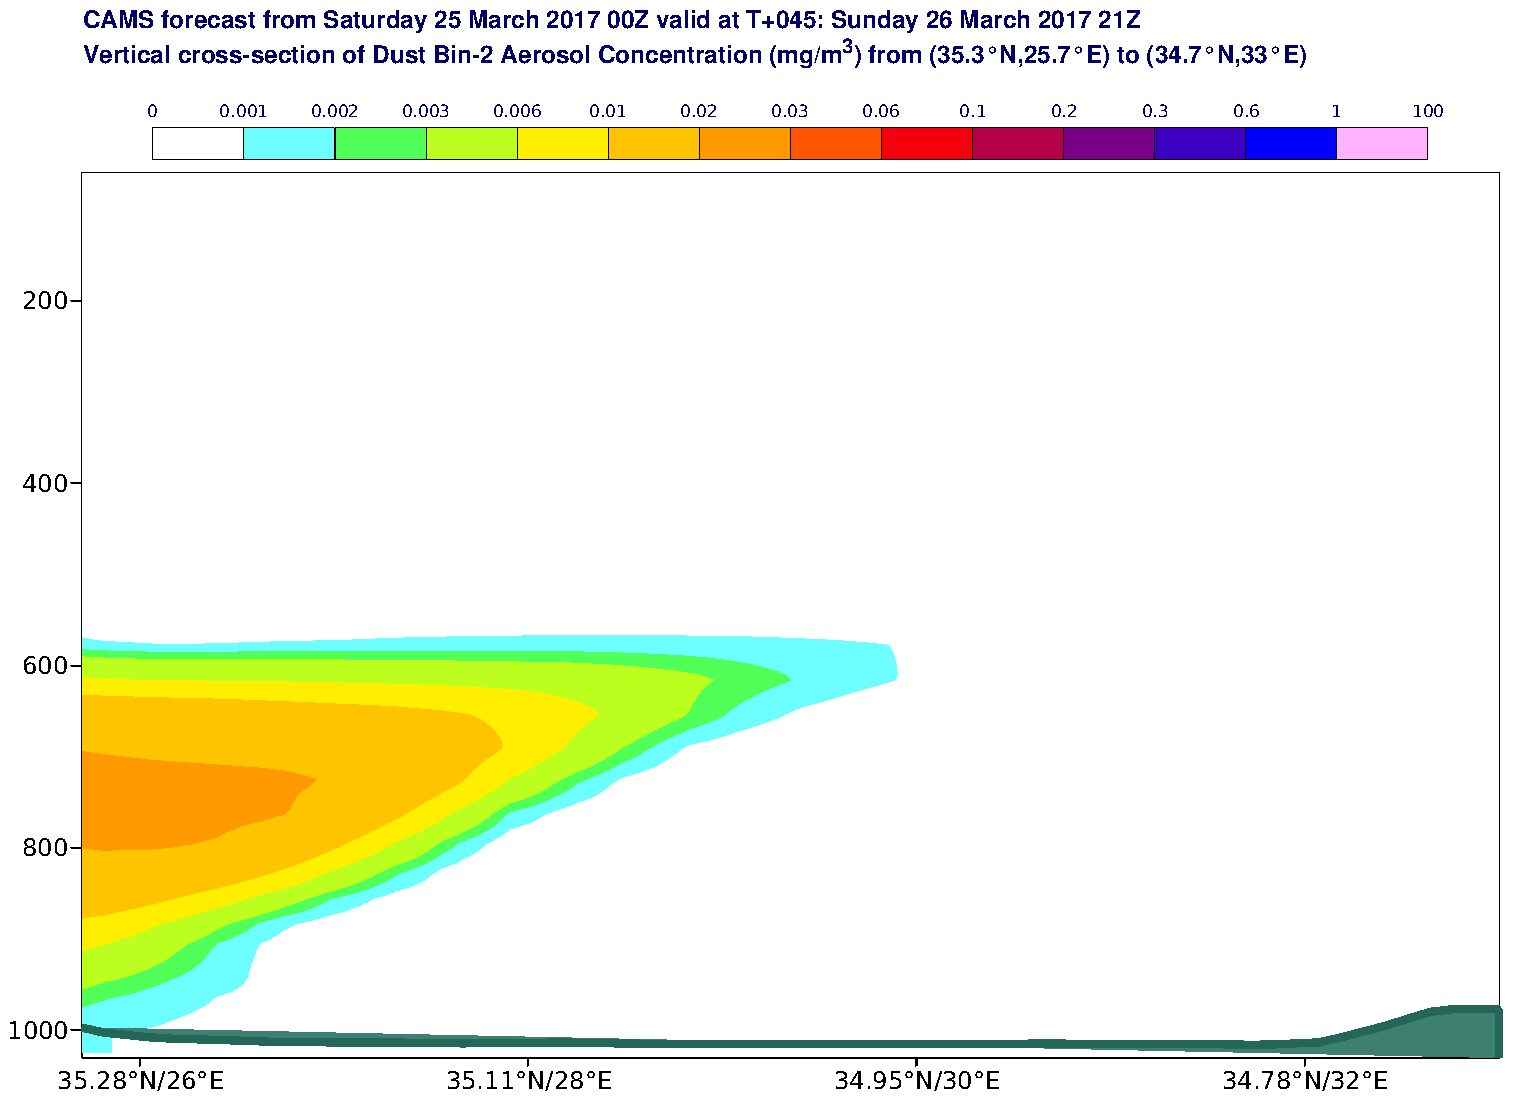 Vertical cross-section of Dust Bin-2 Aerosol Concentration (mg/m3) valid at T45 - 2017-03-26 21:00